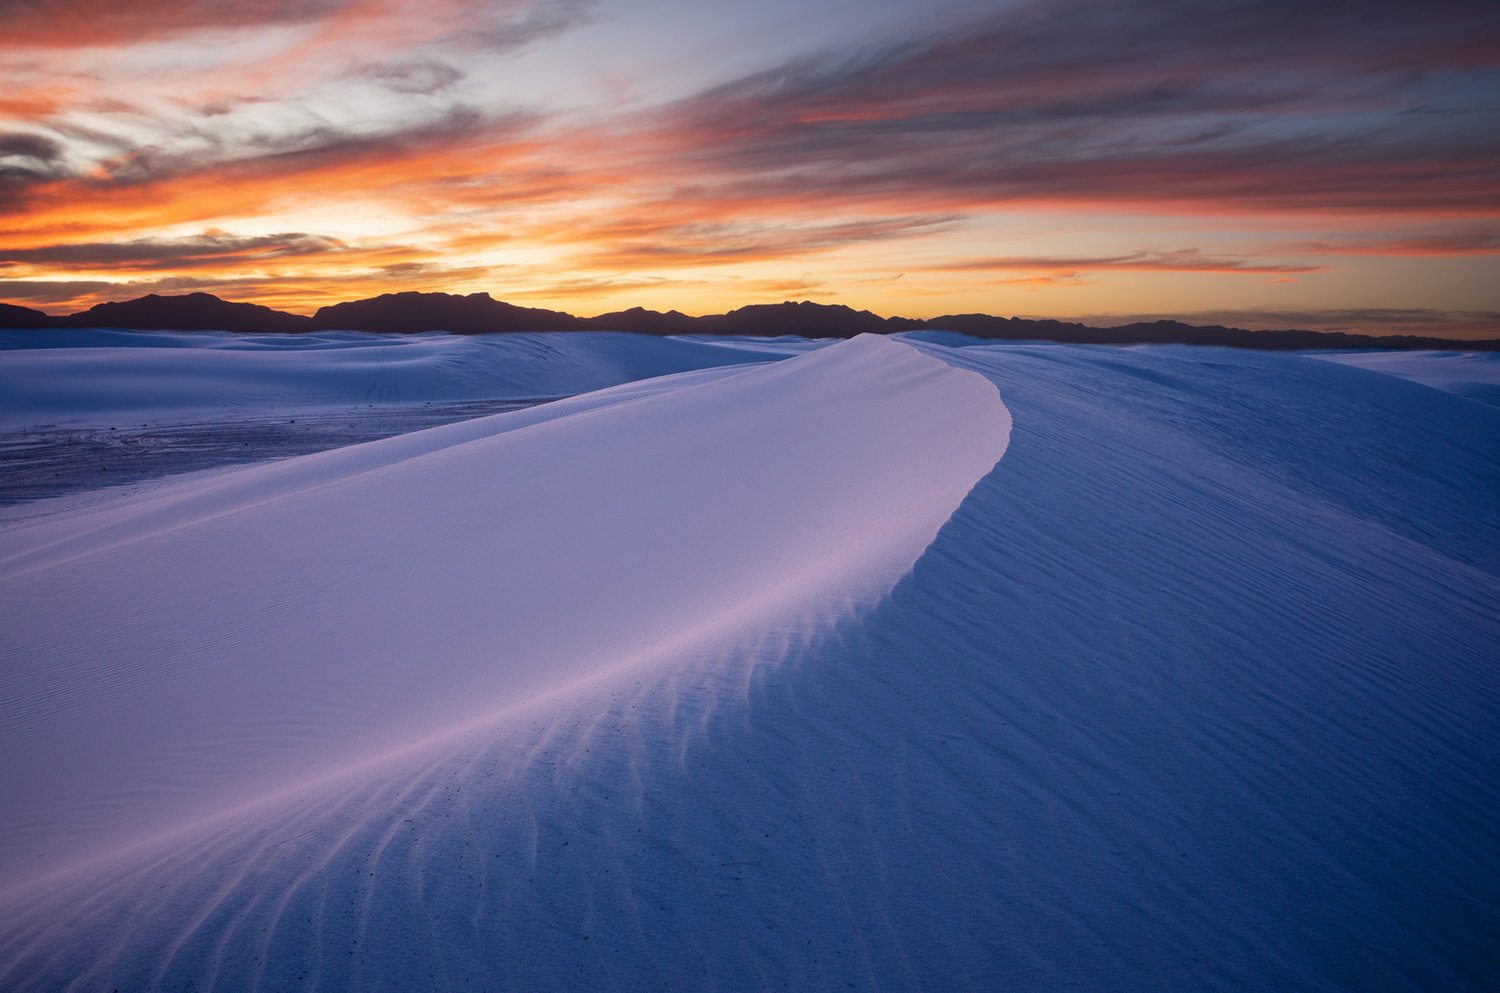 “Blue Hour at White Sands” by David Turning, New Mexico Magazine’s 2020 third place winner in the New Mexico Experiences category.